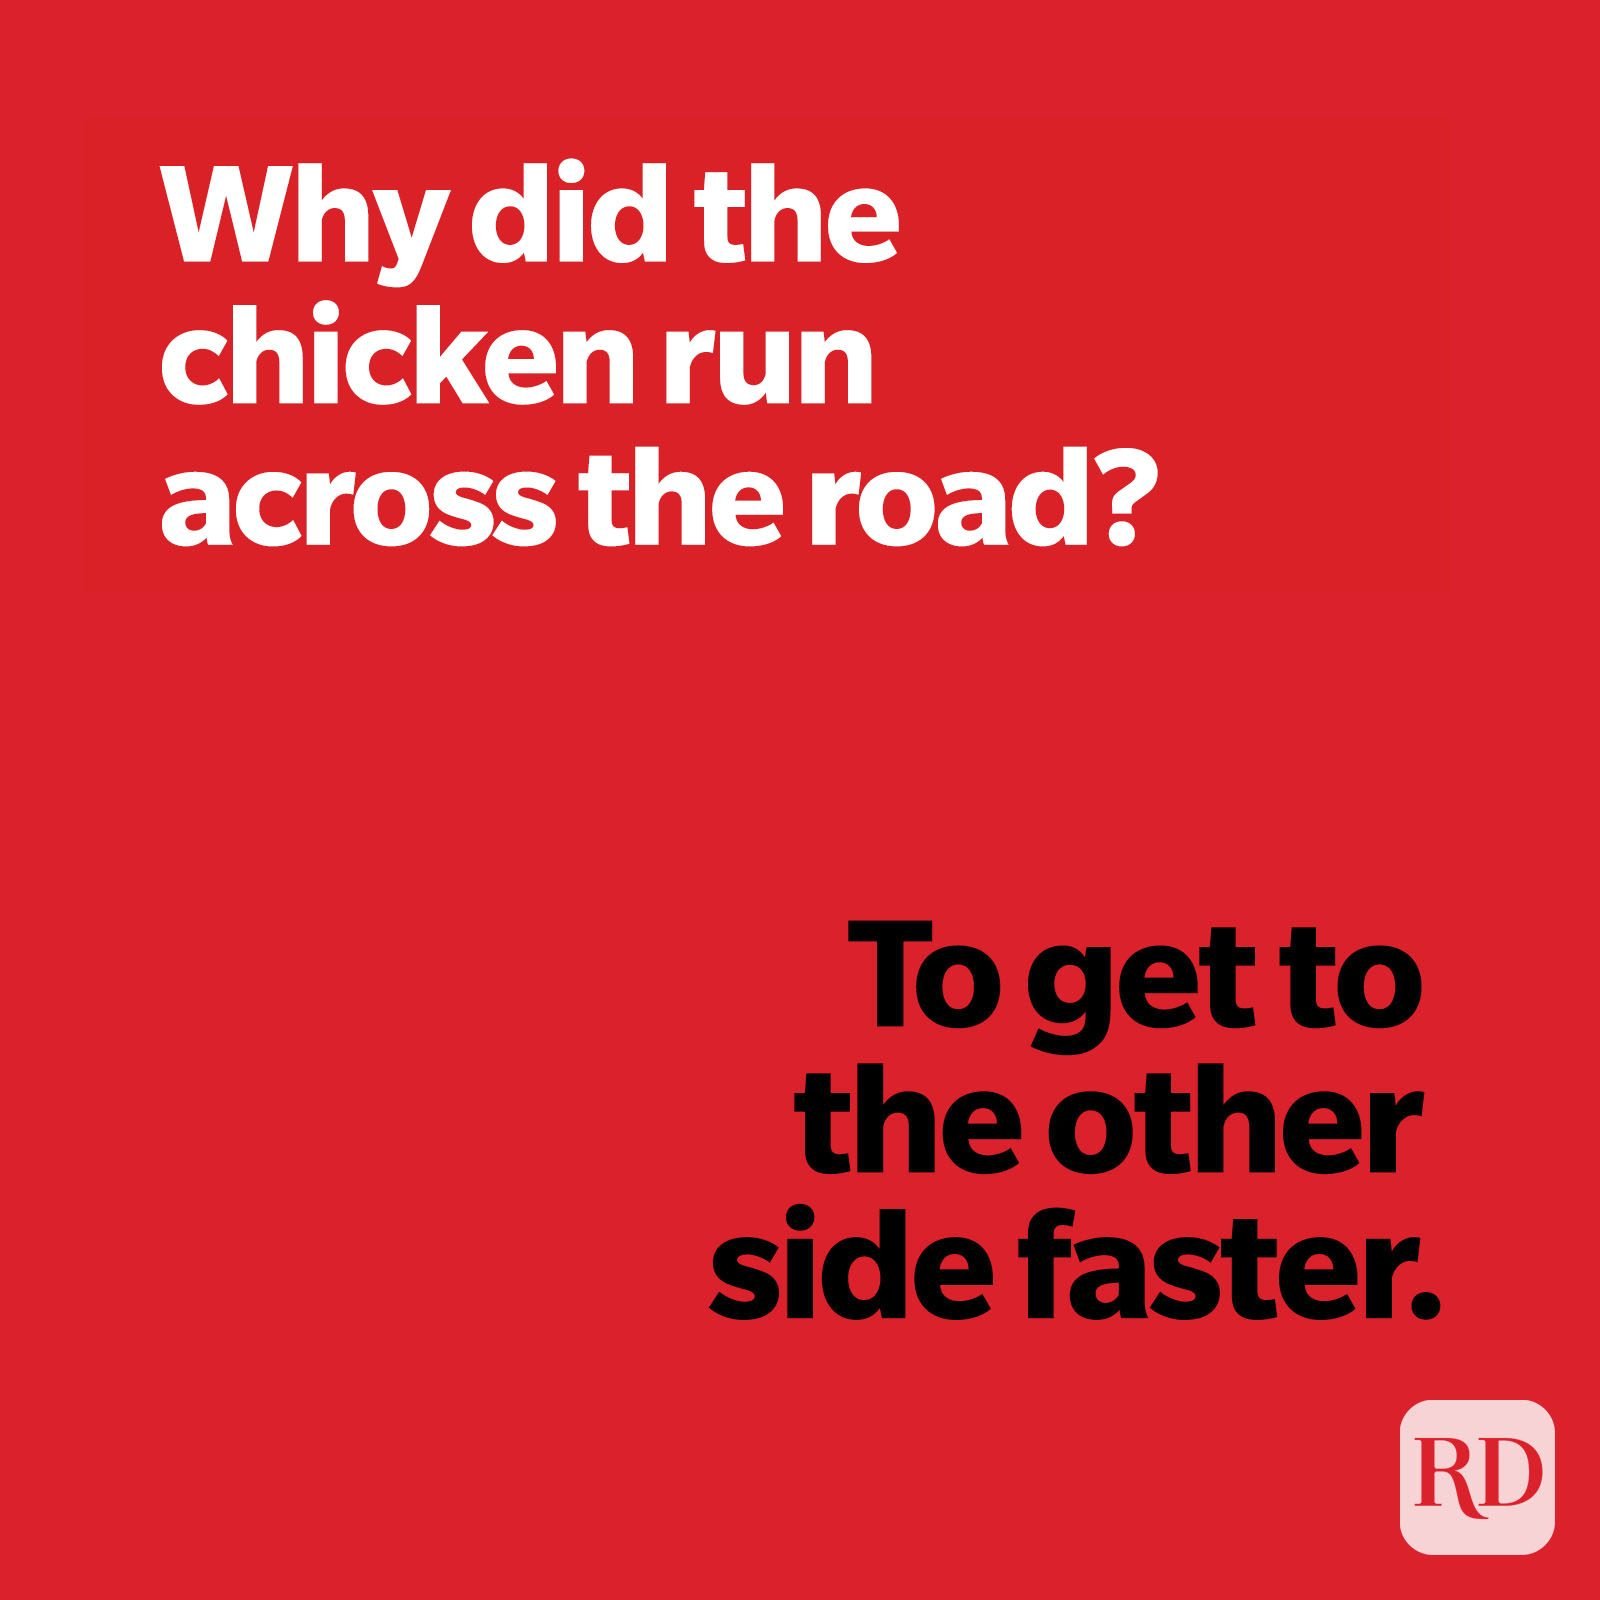 funny-jokes-why-did-the-chicken-cross-the-road-jokes-foster-sciask